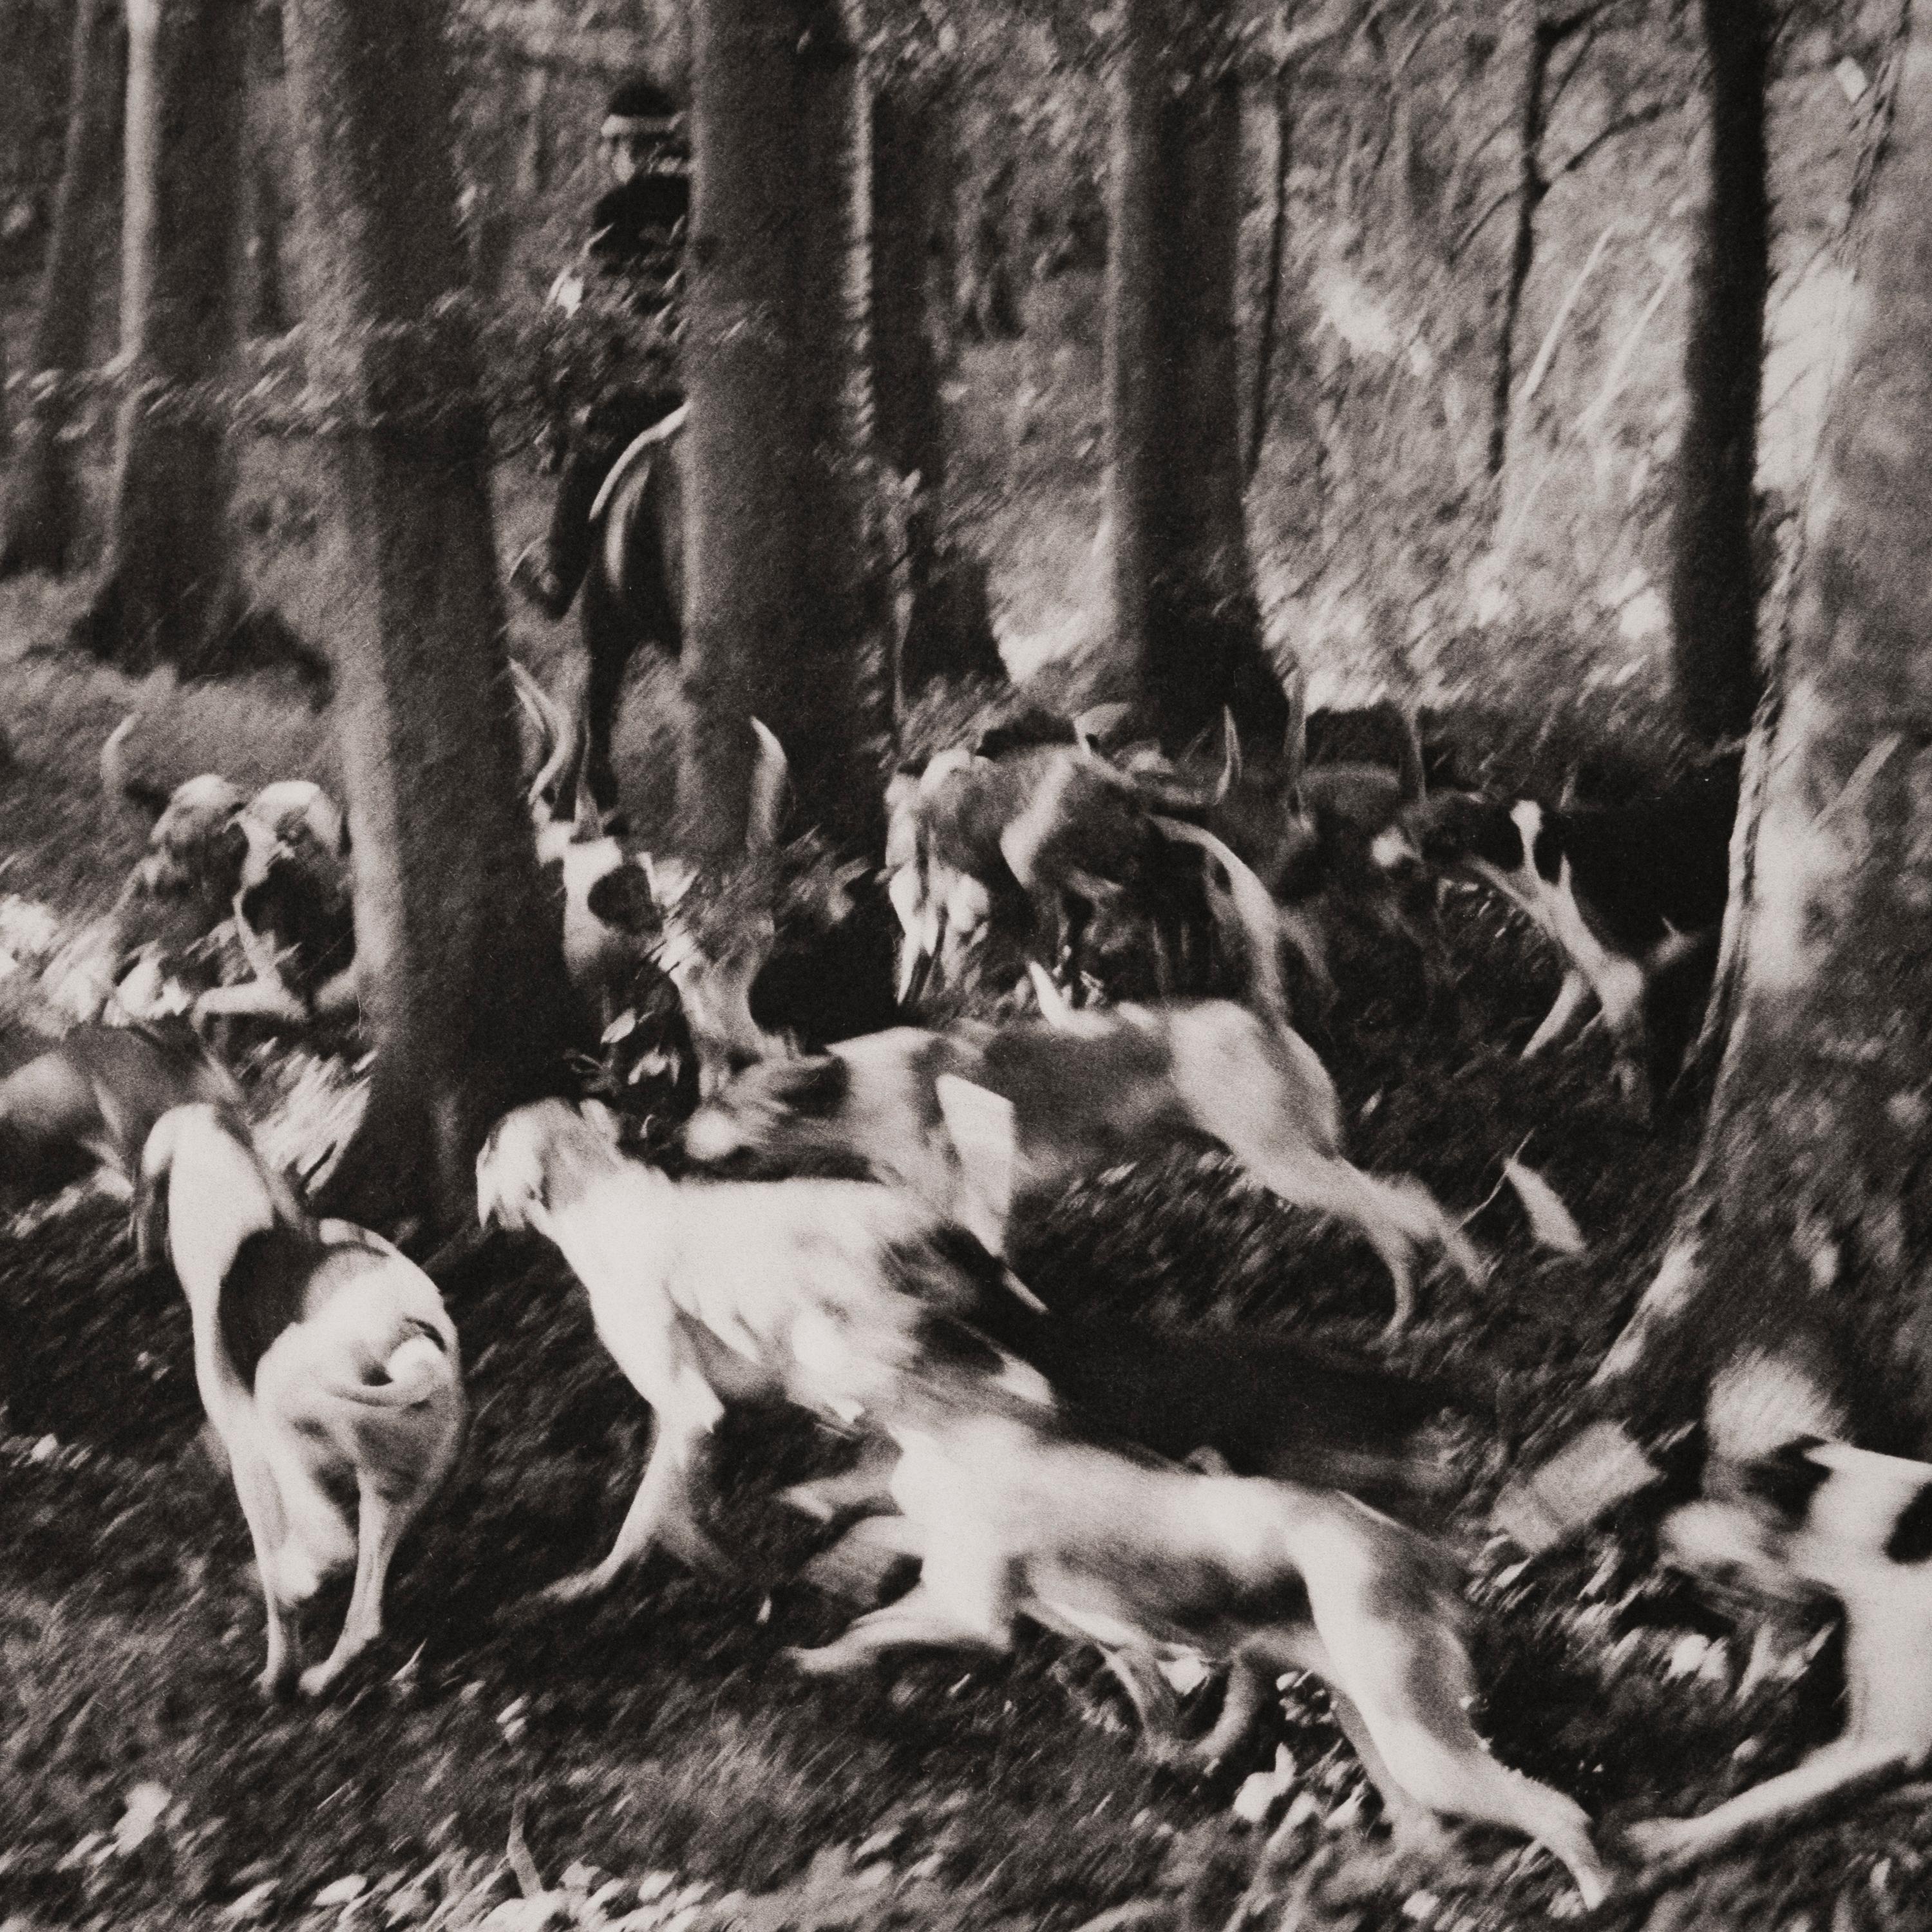 La chasse au cerf, Normandie, France, September 1975 - Photograph by Jonathan Becker